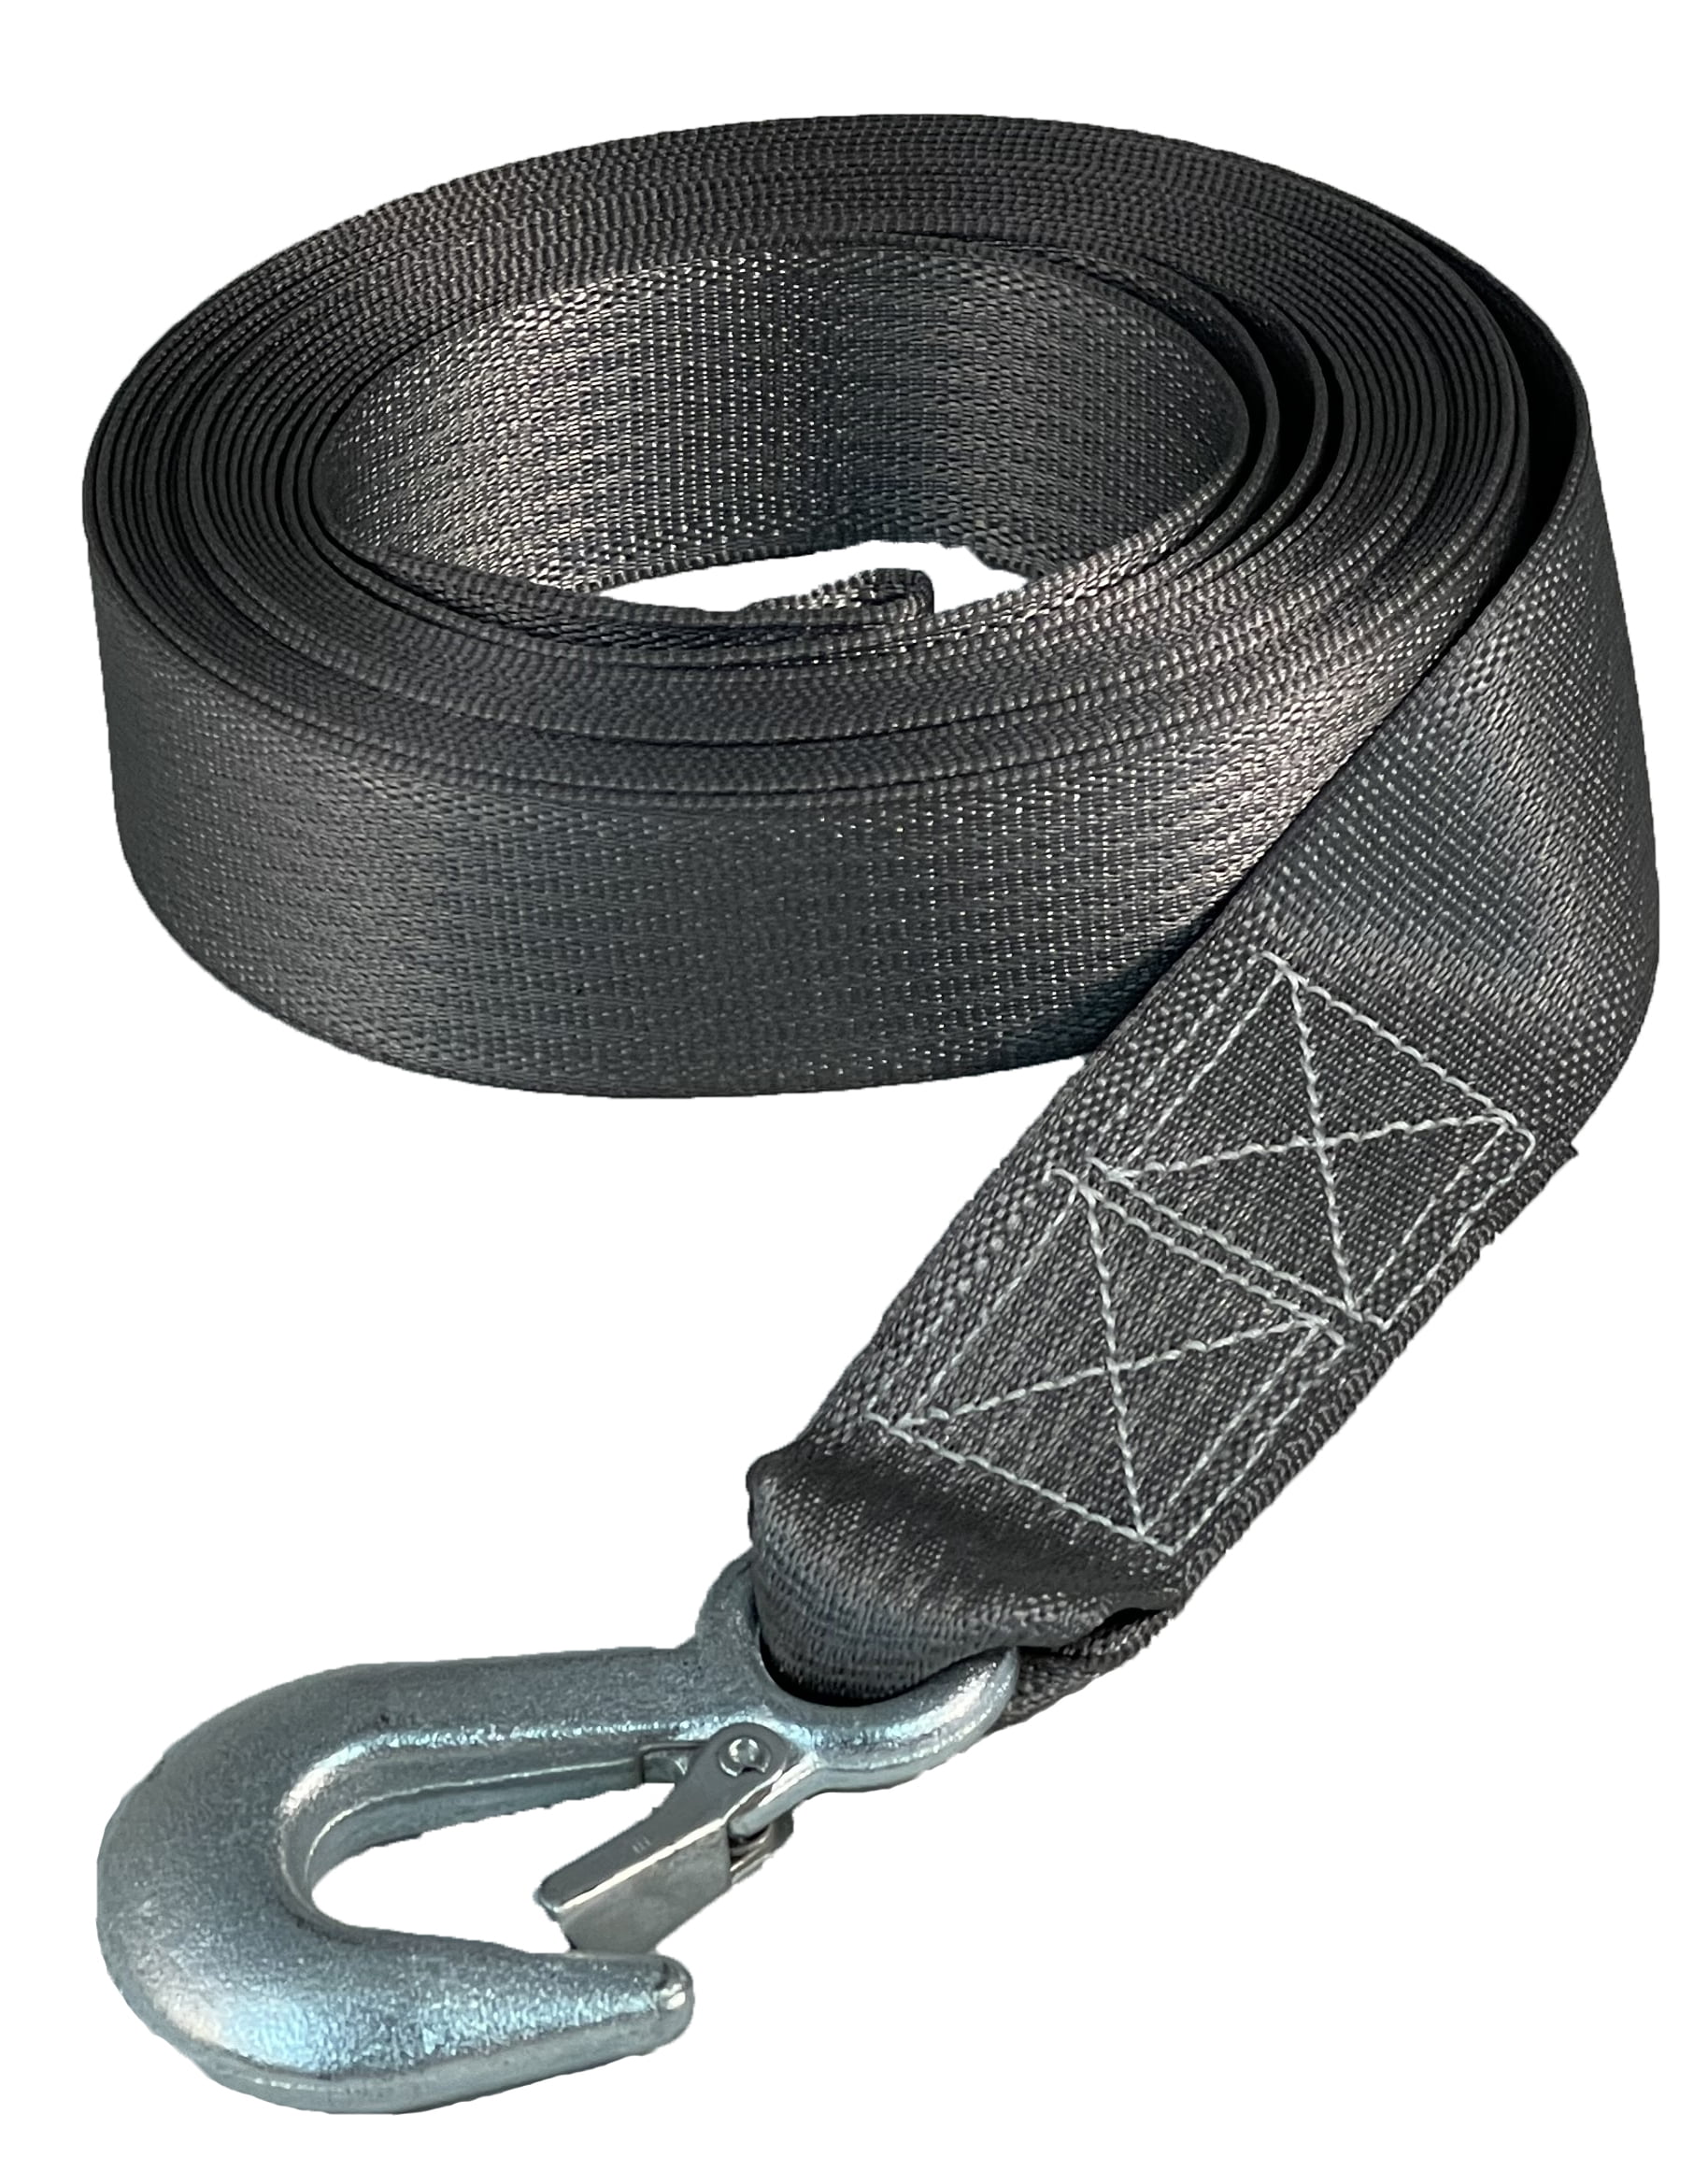 A PAIR OF SECURE QUICK RELEASE STRAPS 1MTR LENGTH 